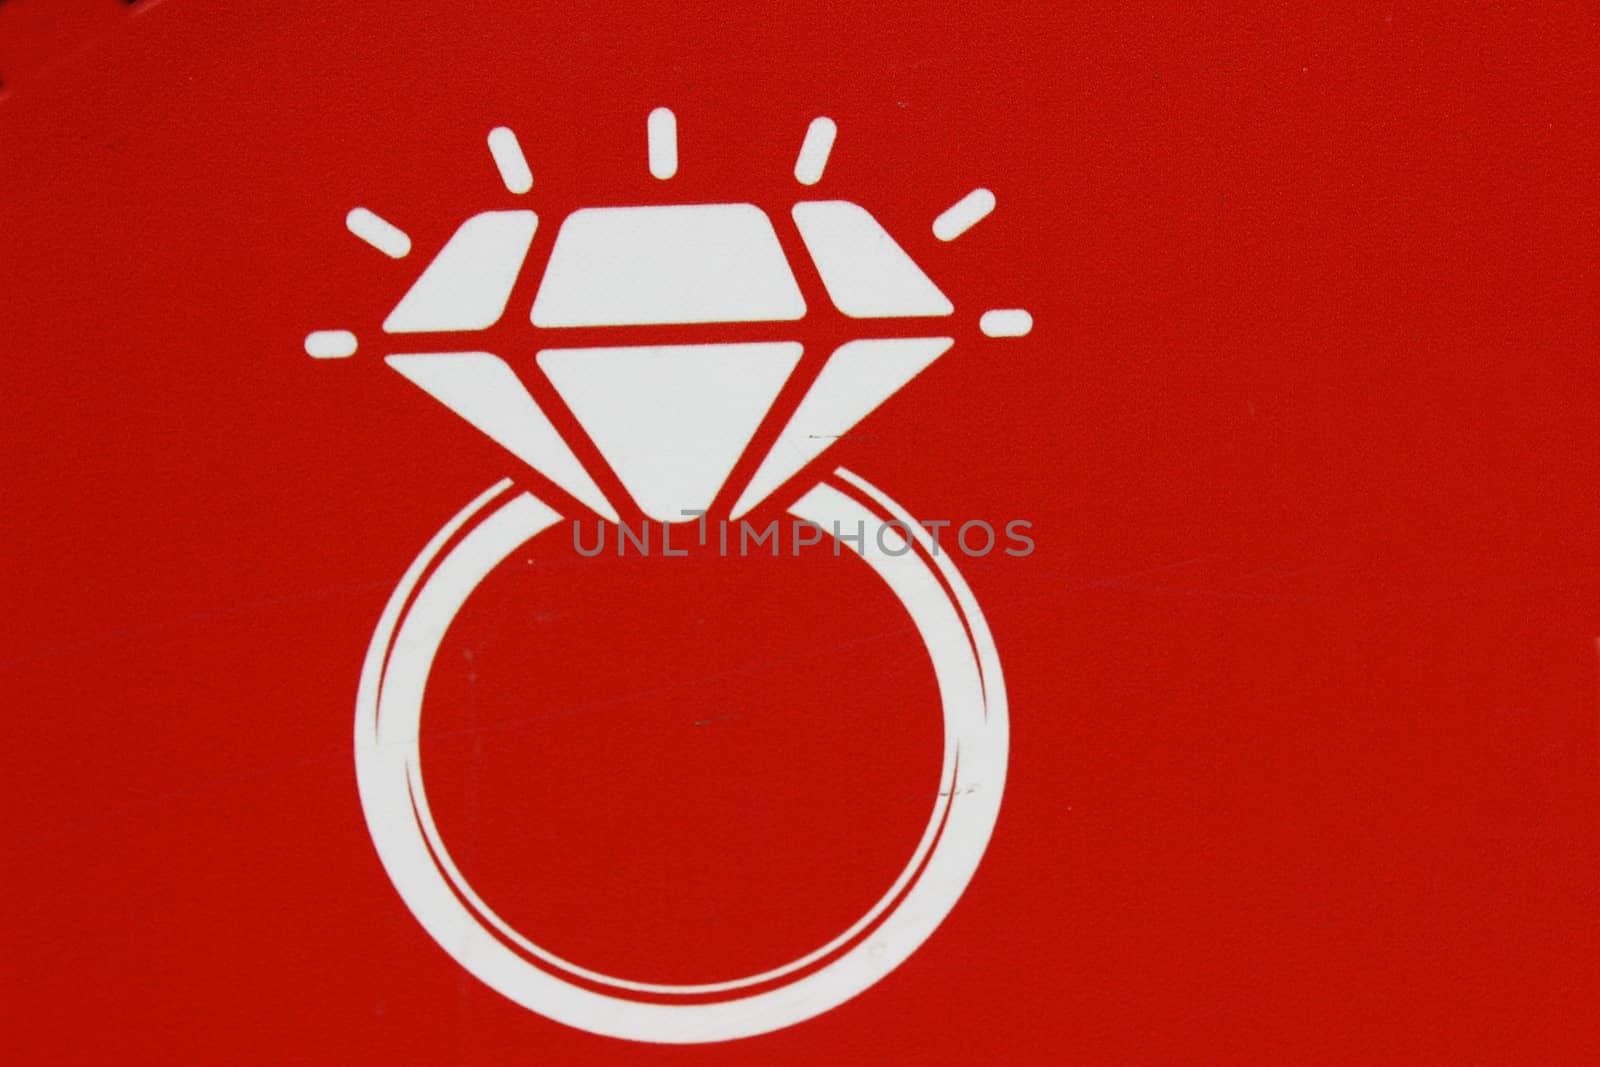 On a red background shows icon "jewels" in white